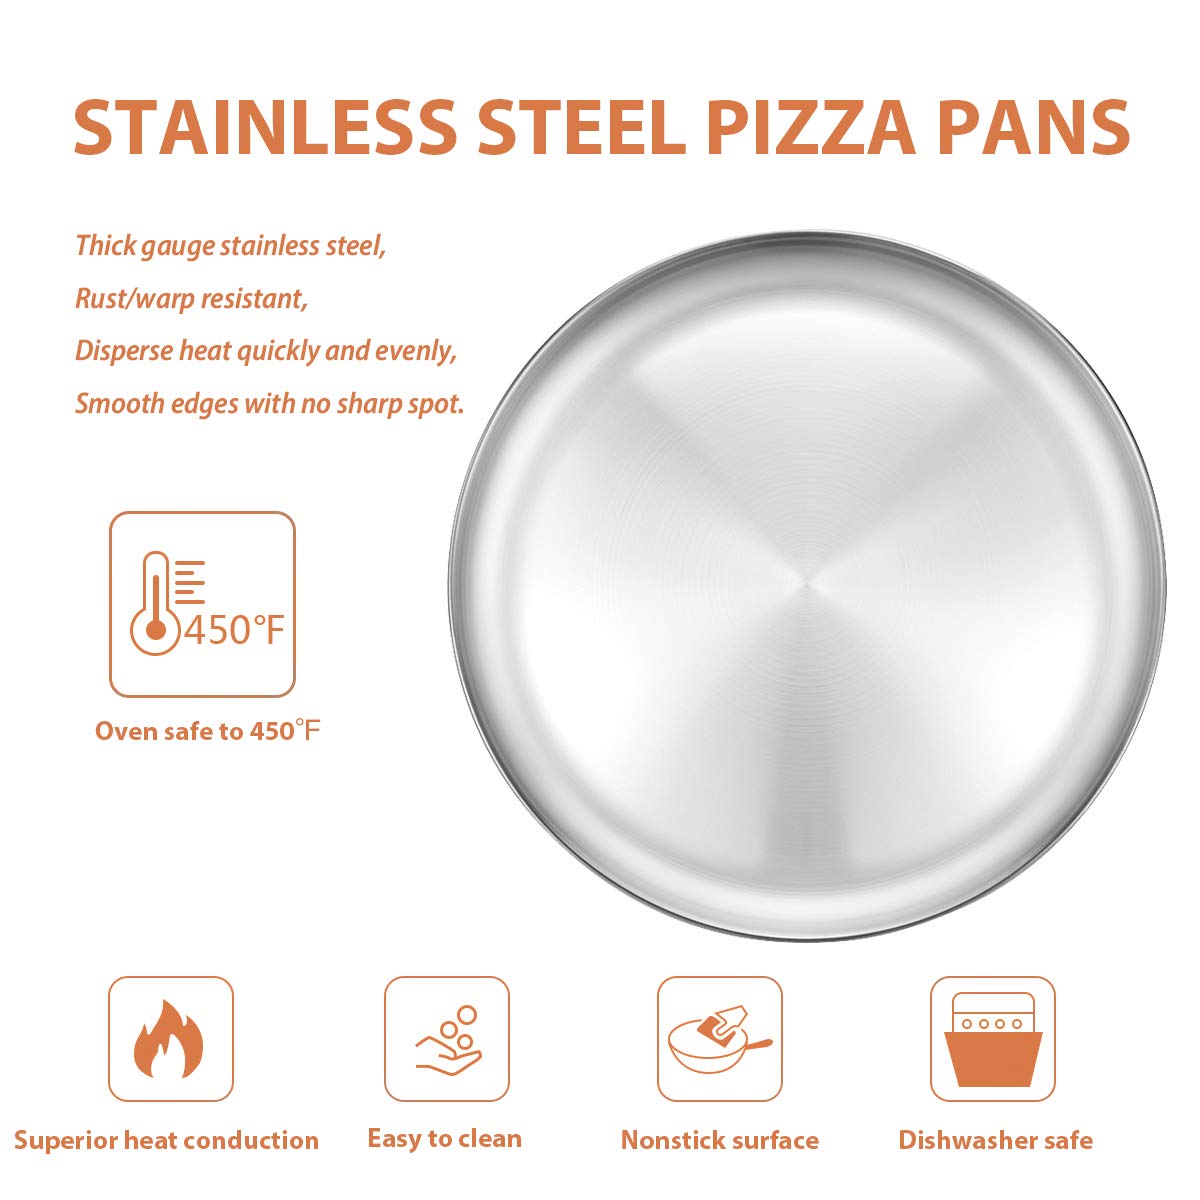 Deedro Stainless Steel Pizza Pan 13½ inch Round Pizza Tray Pizza Baking Sheet, Healthy Pizza Baking Pan Pizza Serving Tray Crisper Pan, Dishwasher Safe, 3 Pack